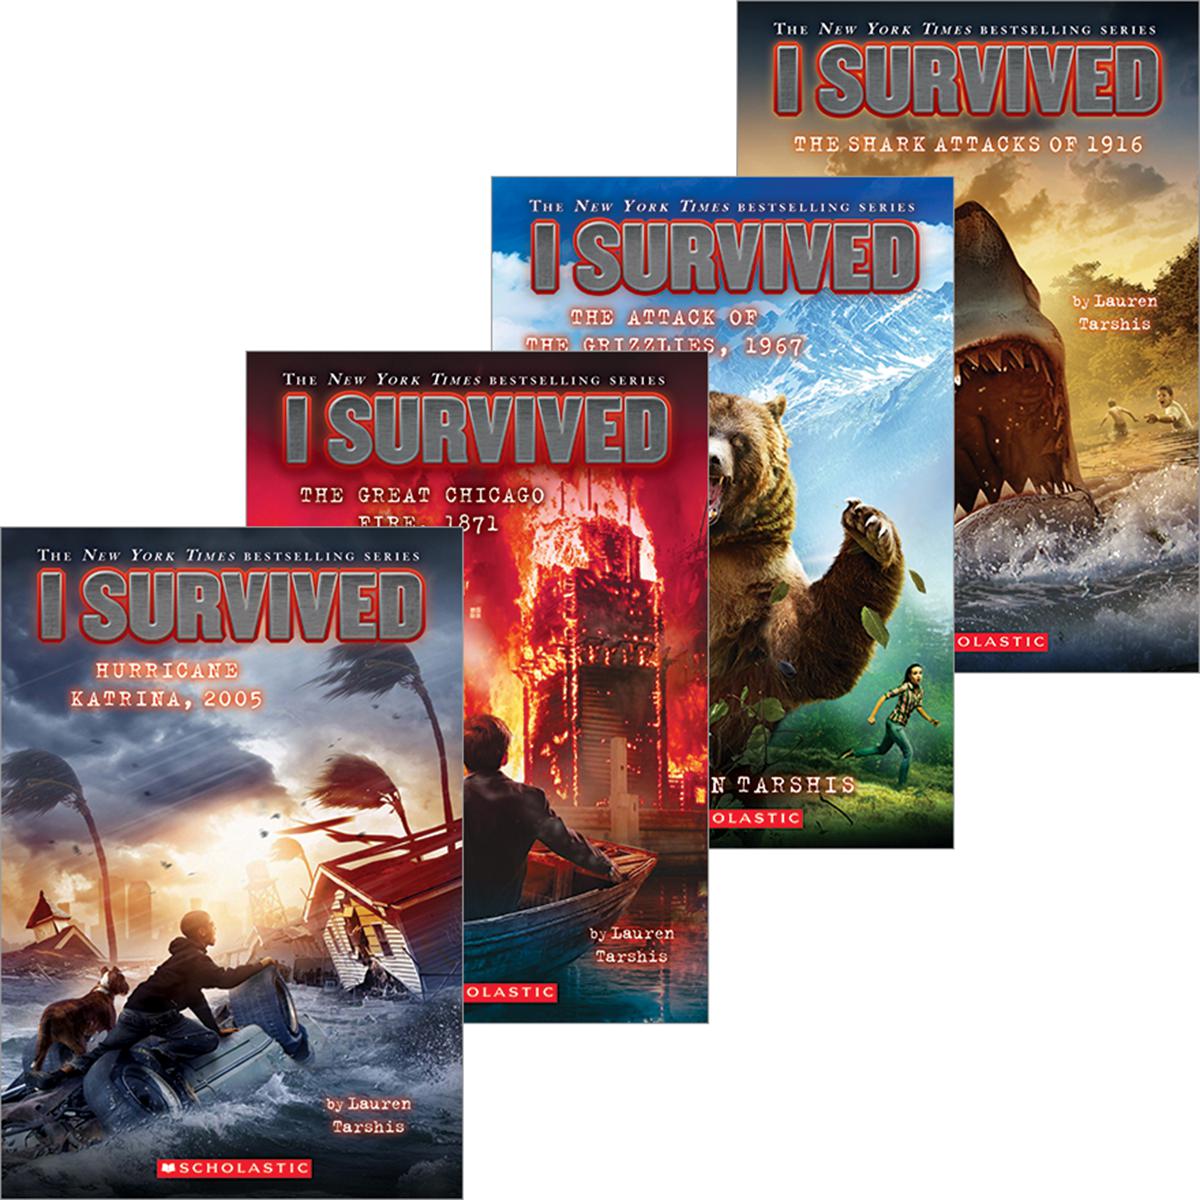  I Survived: Dangerous Disasters Pack 